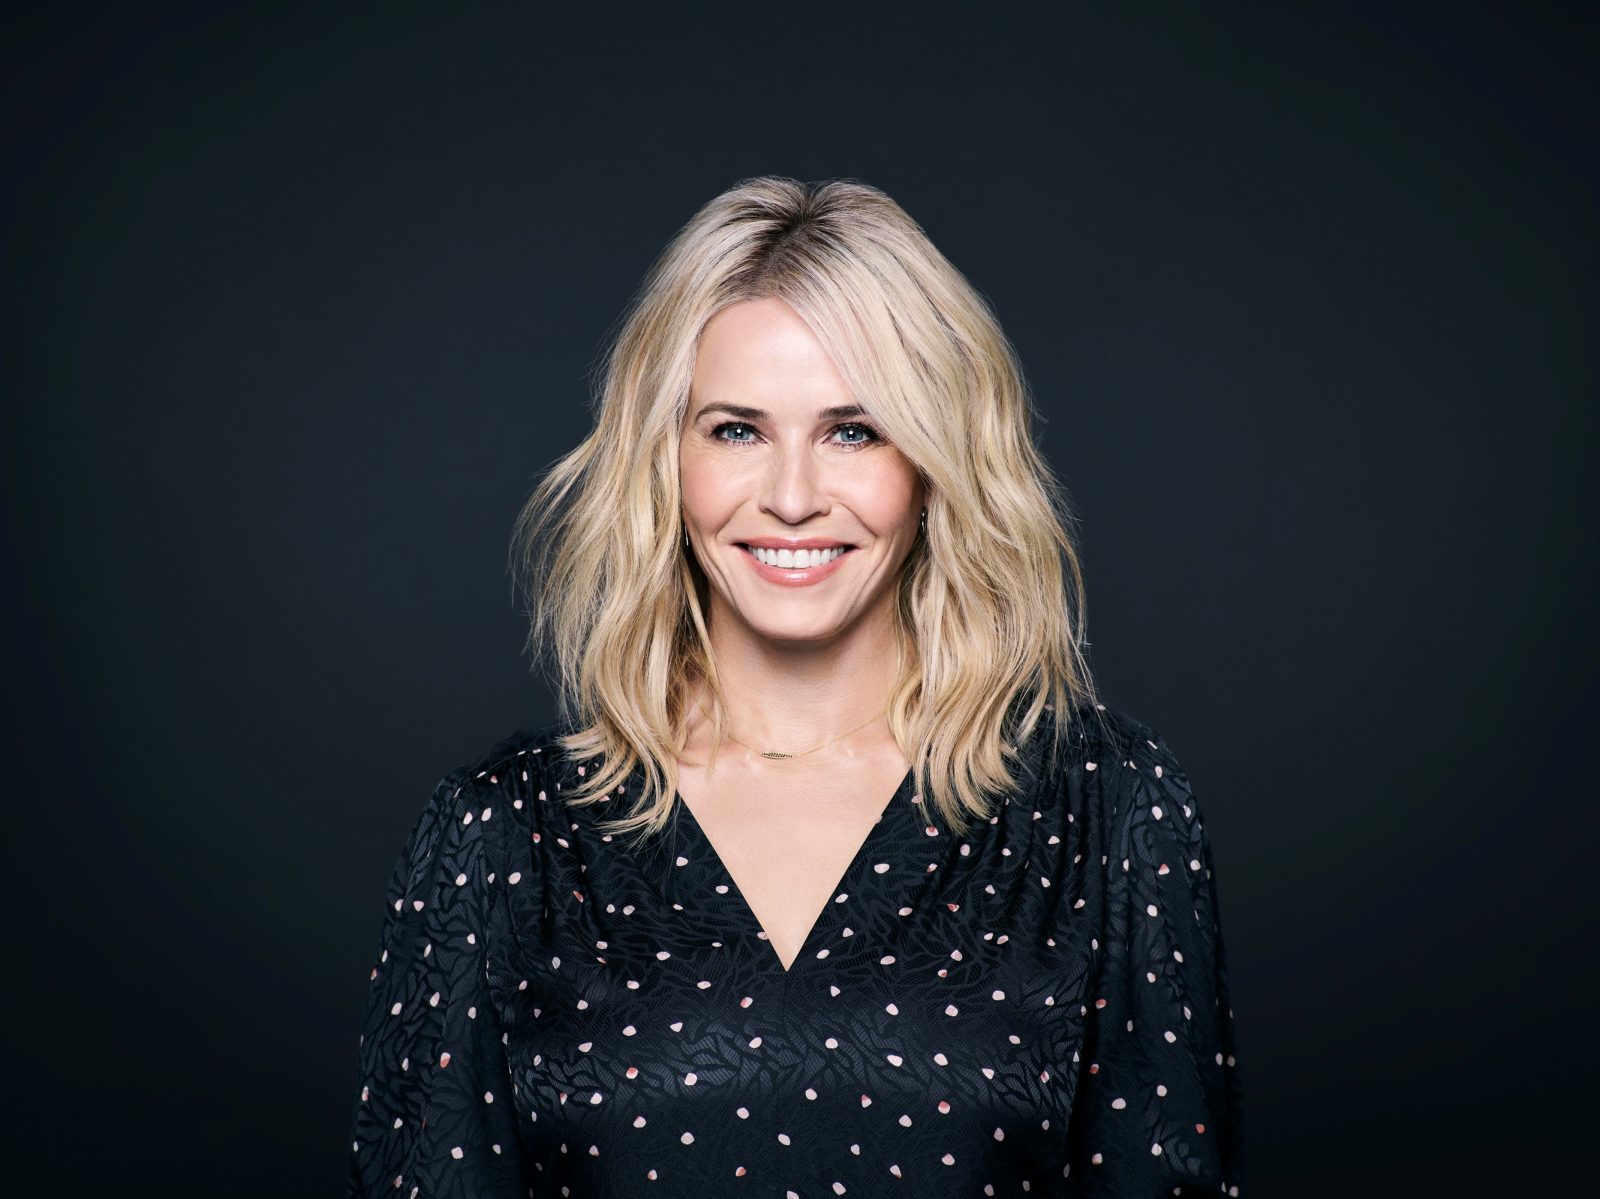 Chelsea Handler Biography Height Weight Age Movies Husband Family Salary Net Worth Facts More